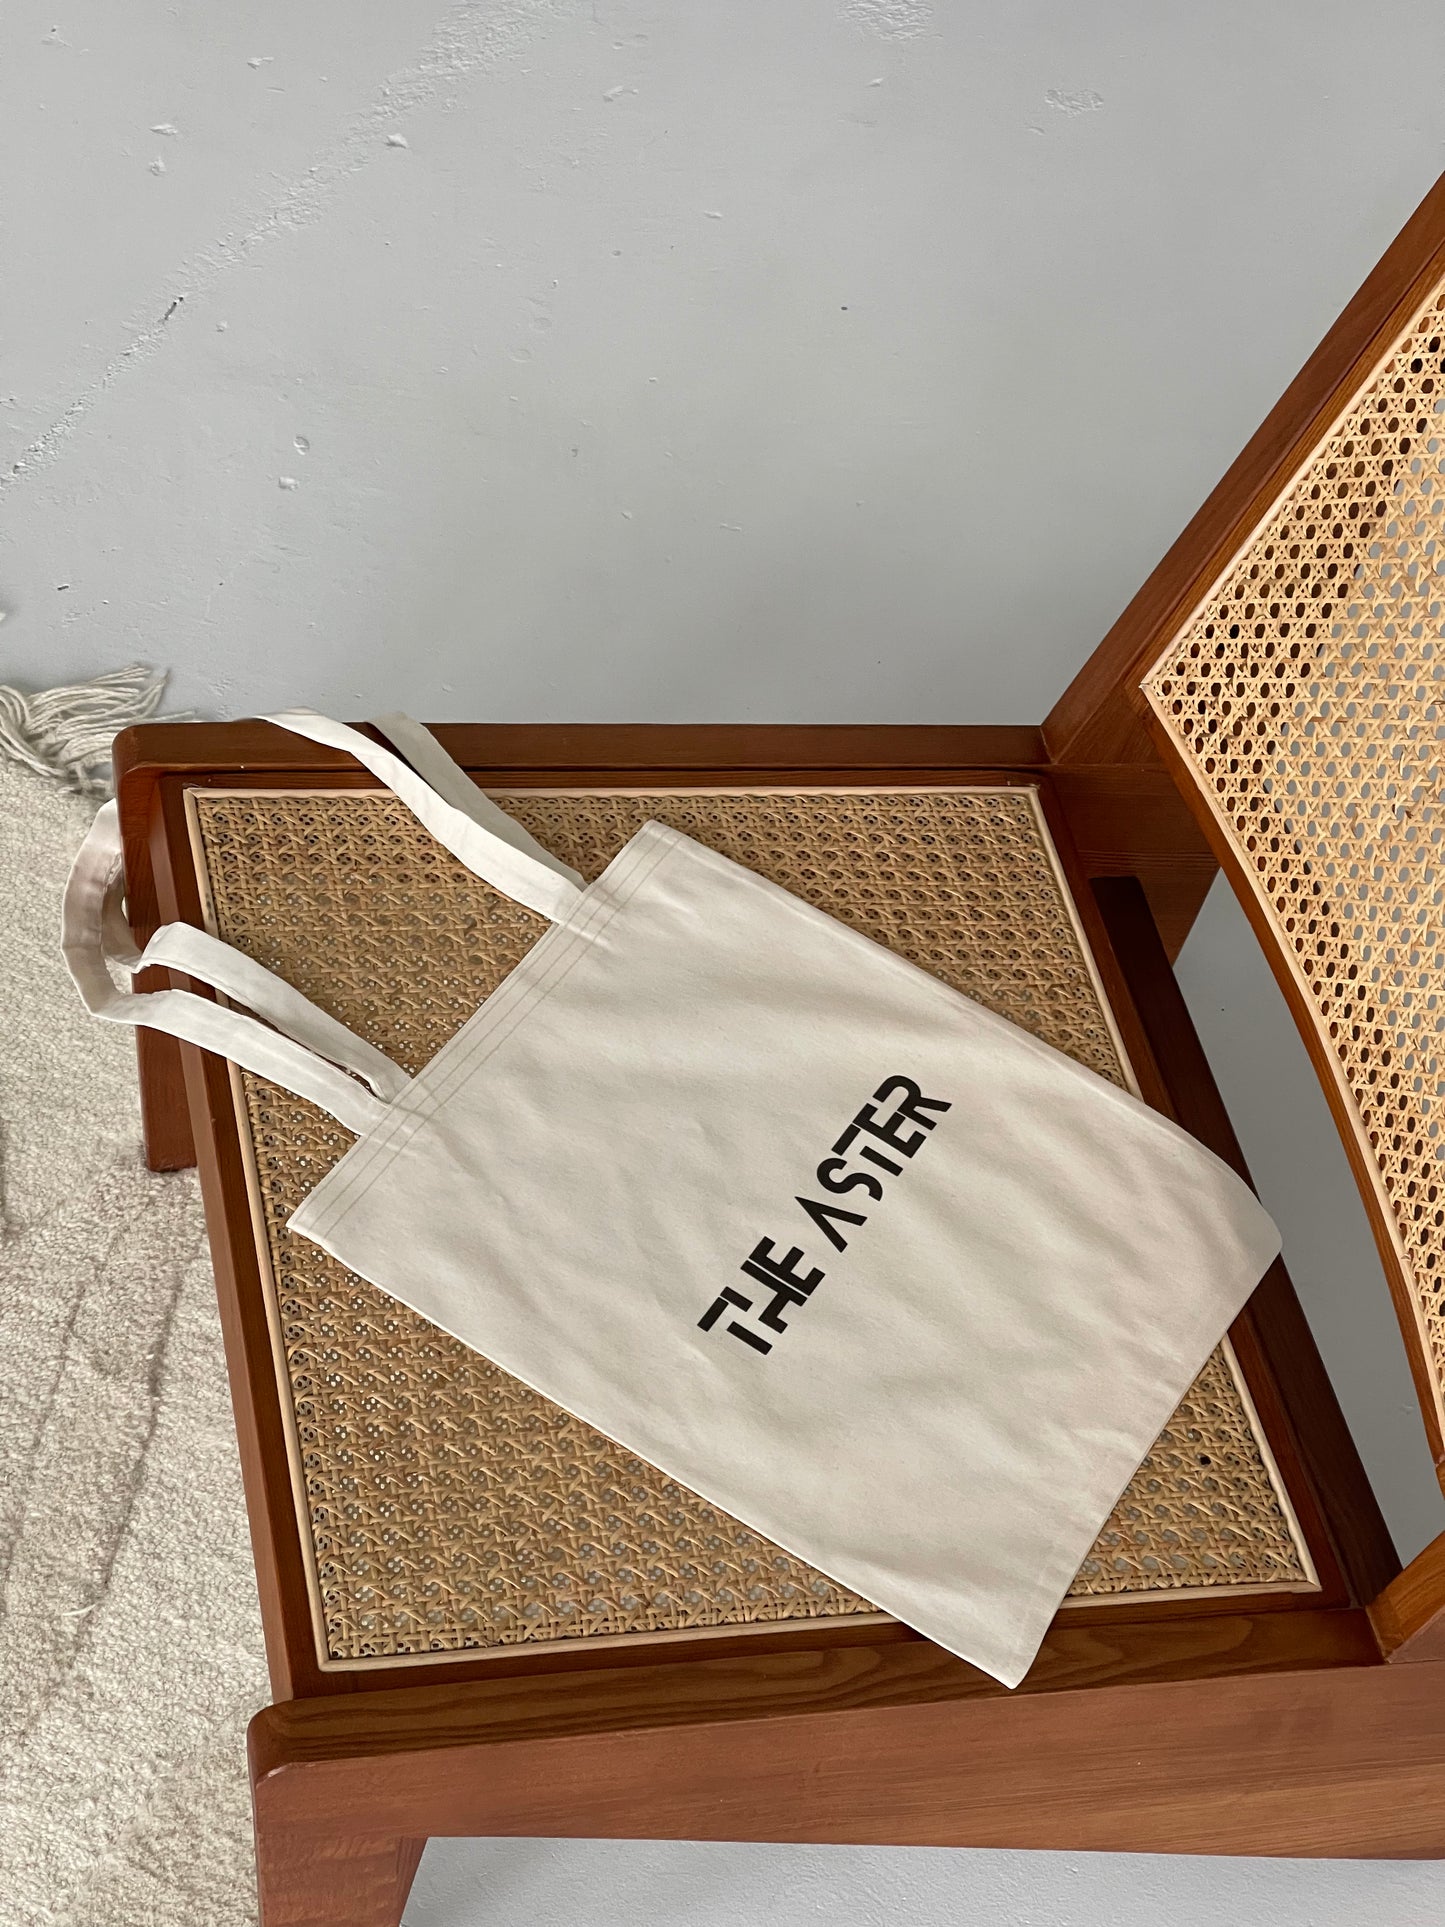 Tote bag "Treat people with kindness"